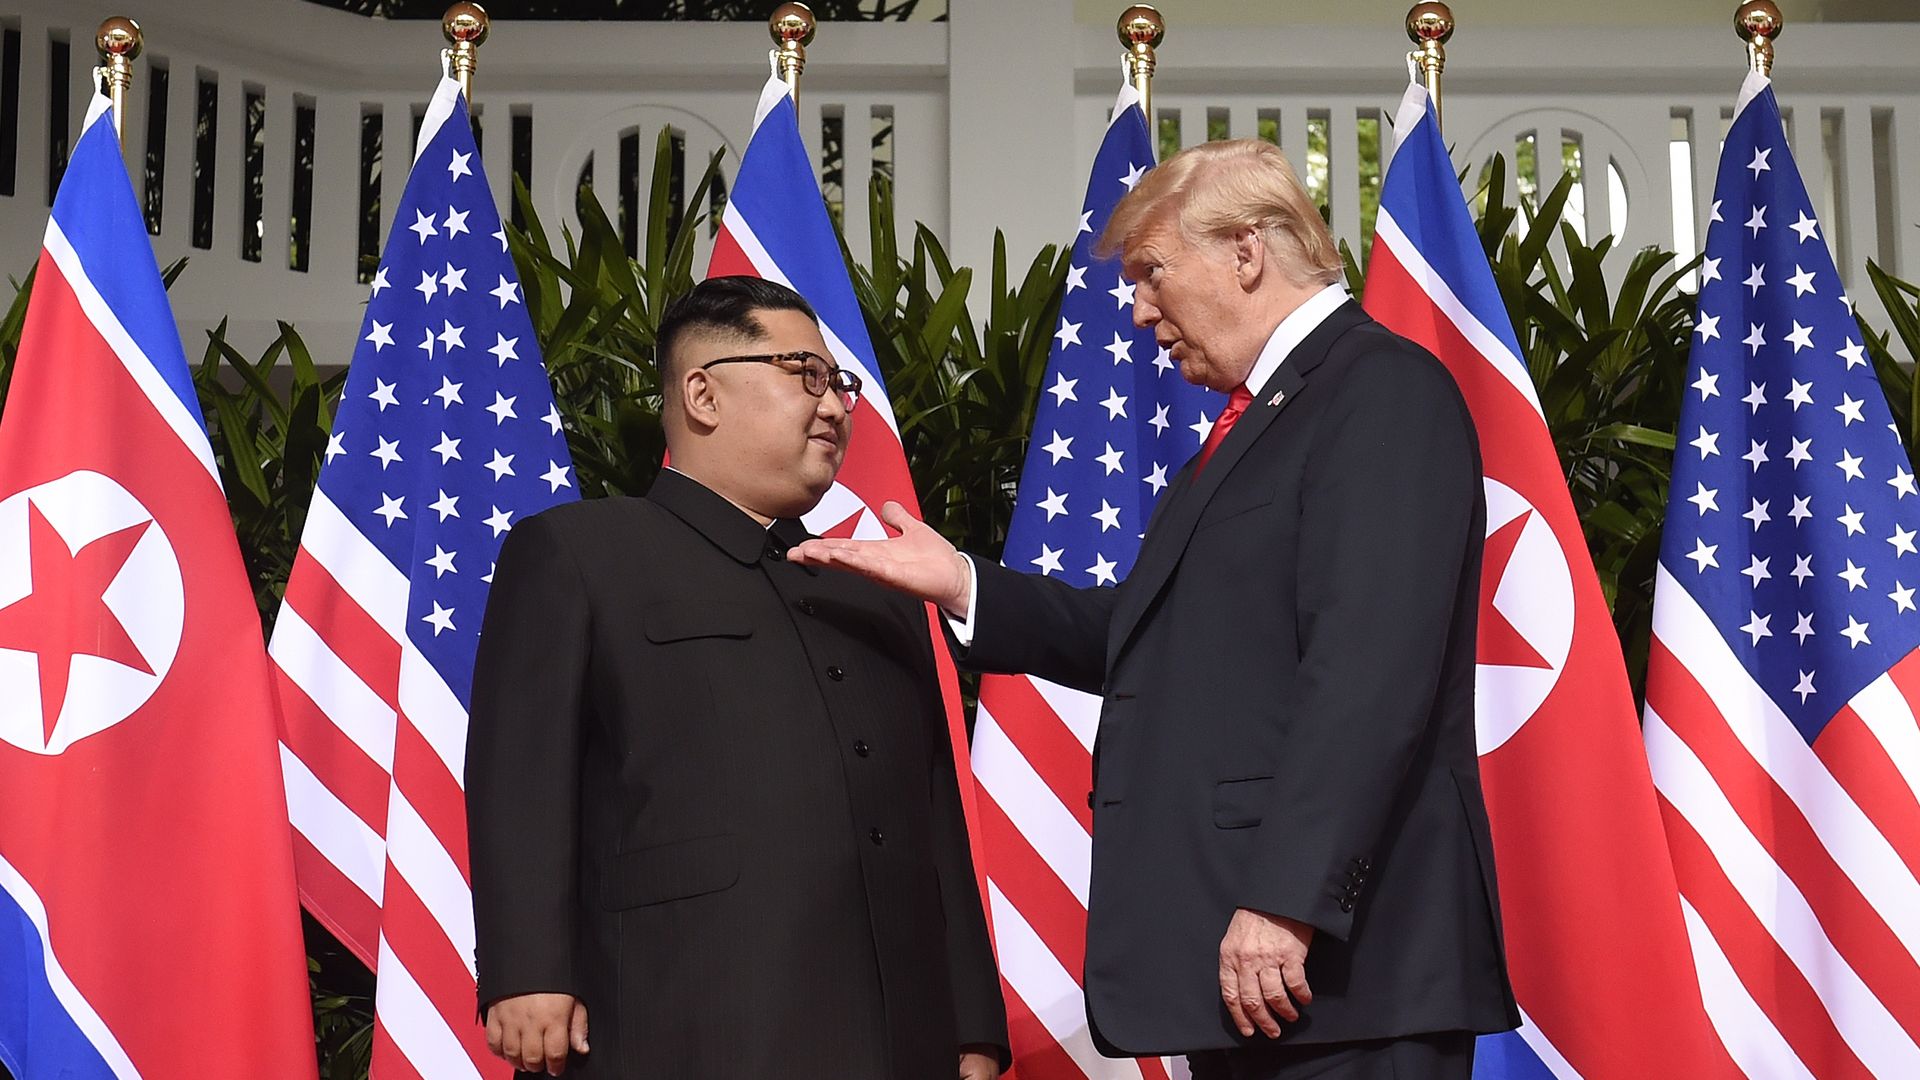 Kim Jong-un and Donald Trump in front of flags